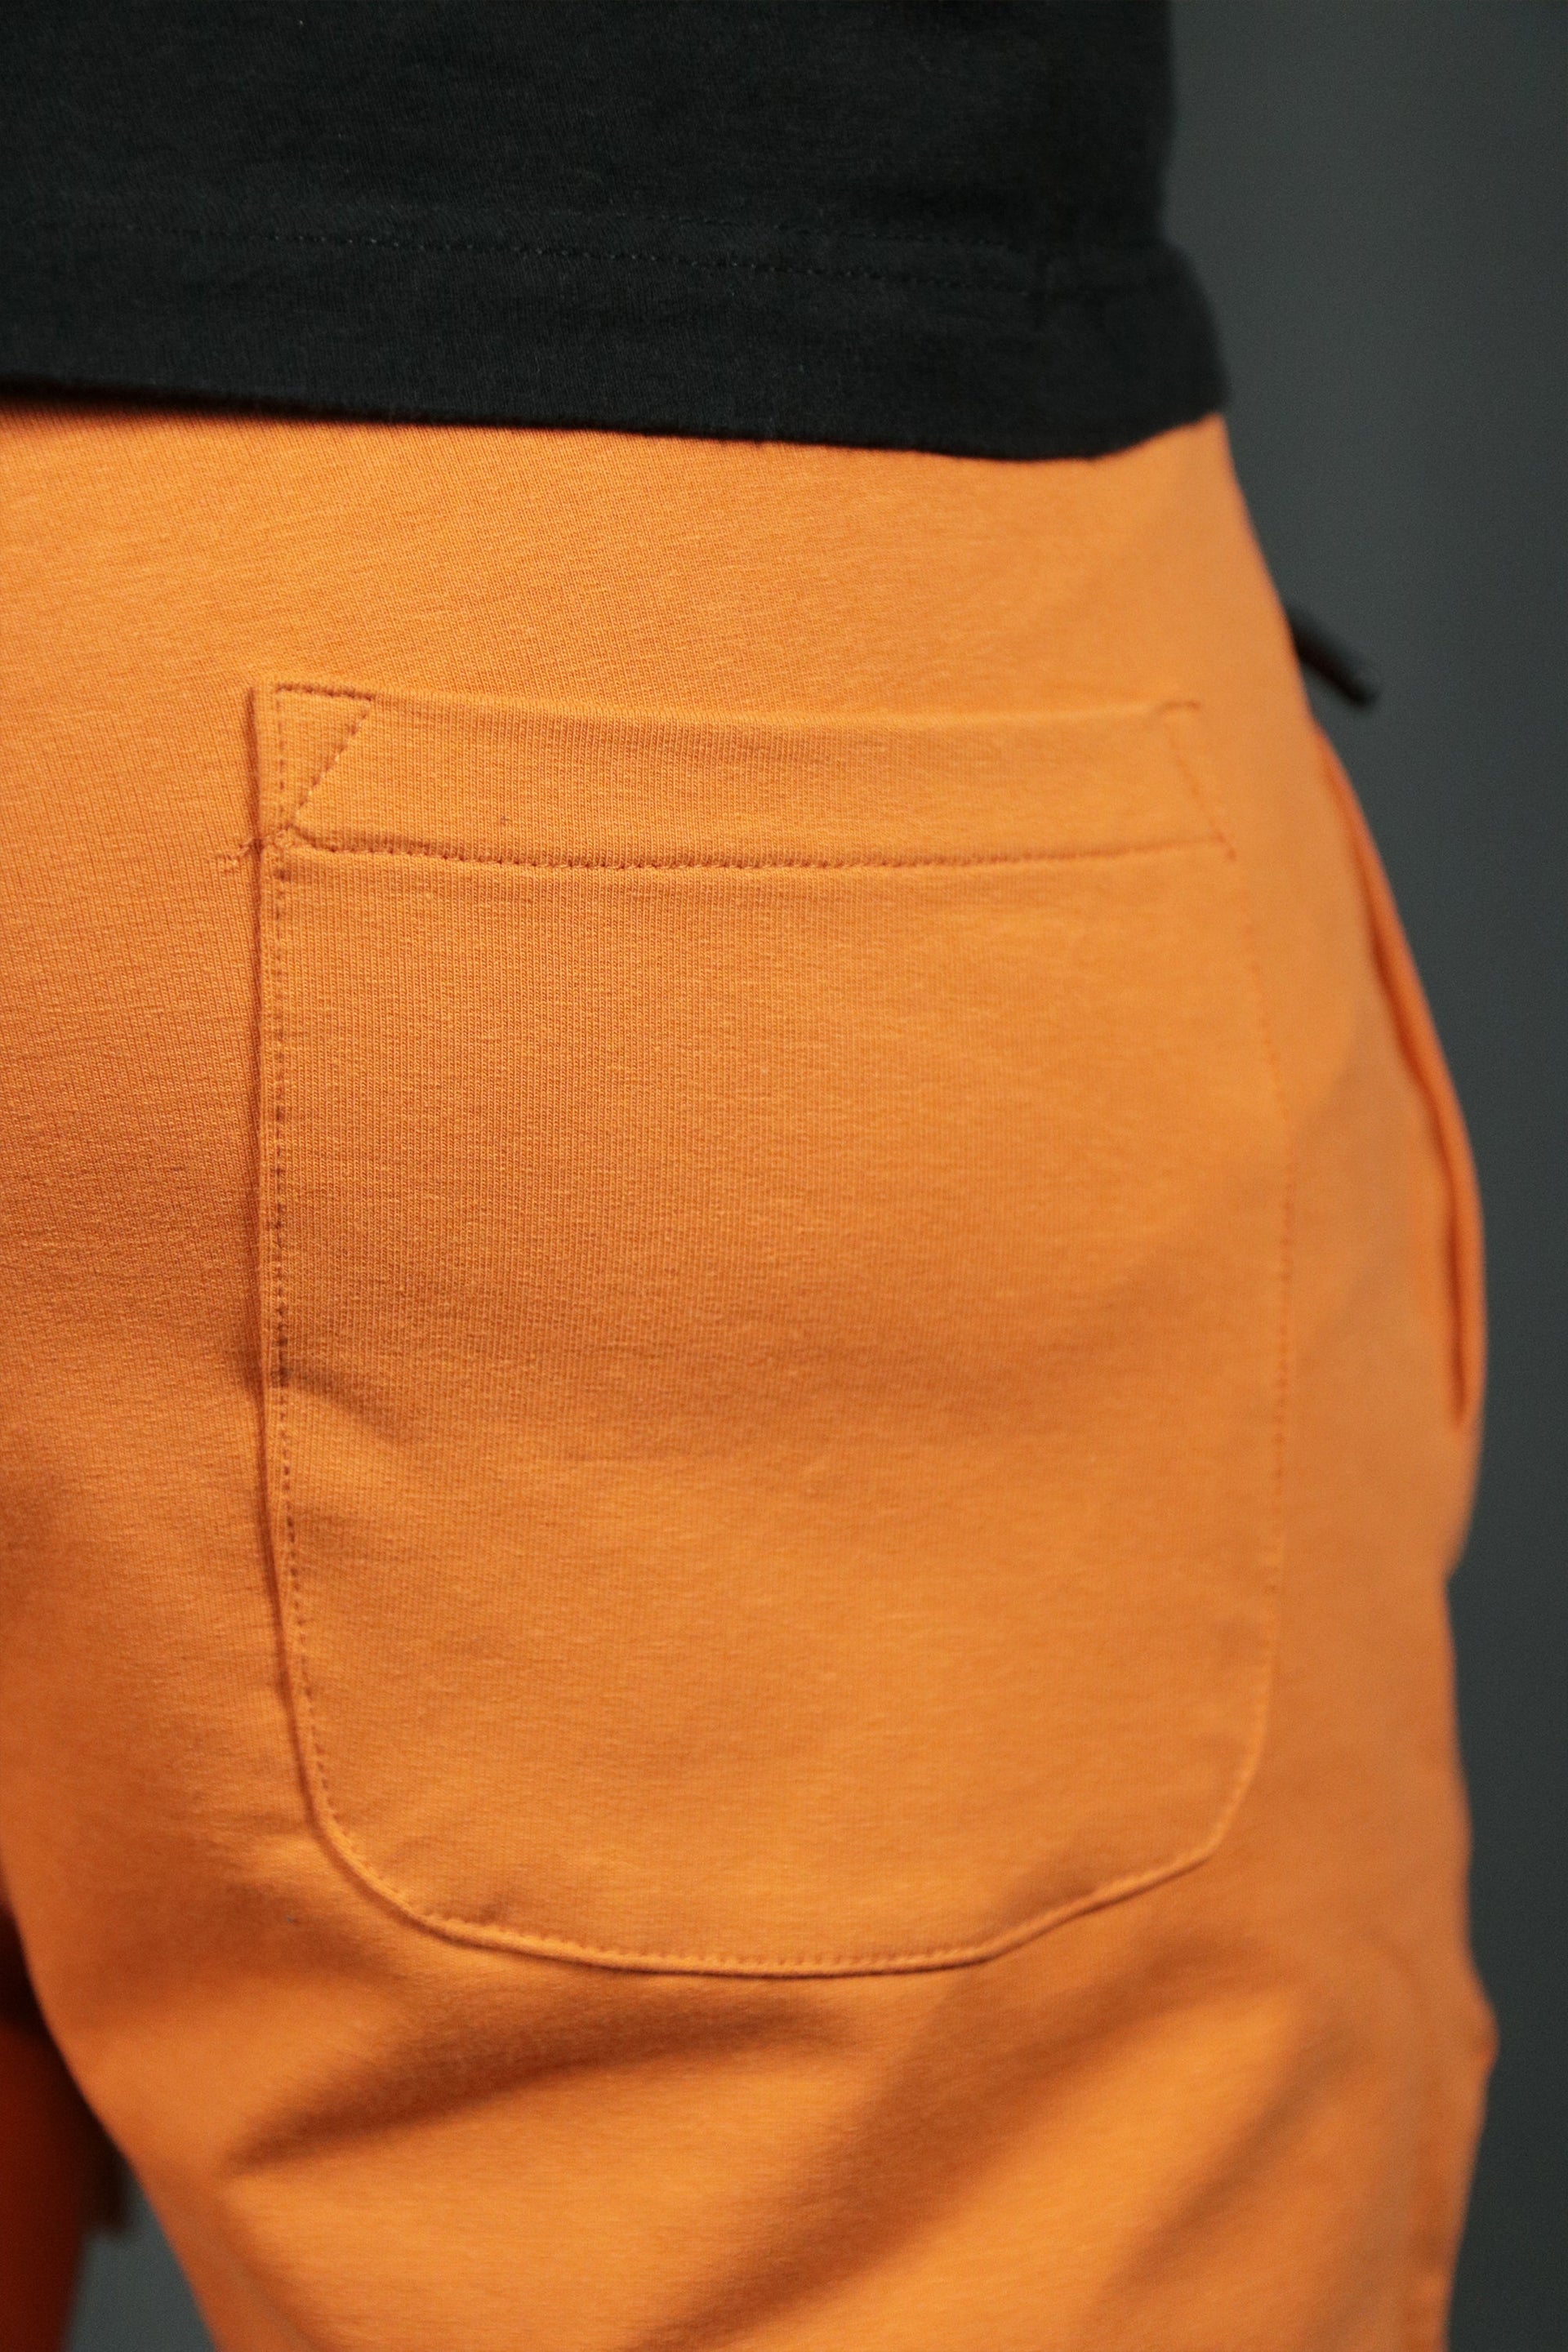 The back pocket of the orange mens terry cloth shorts.